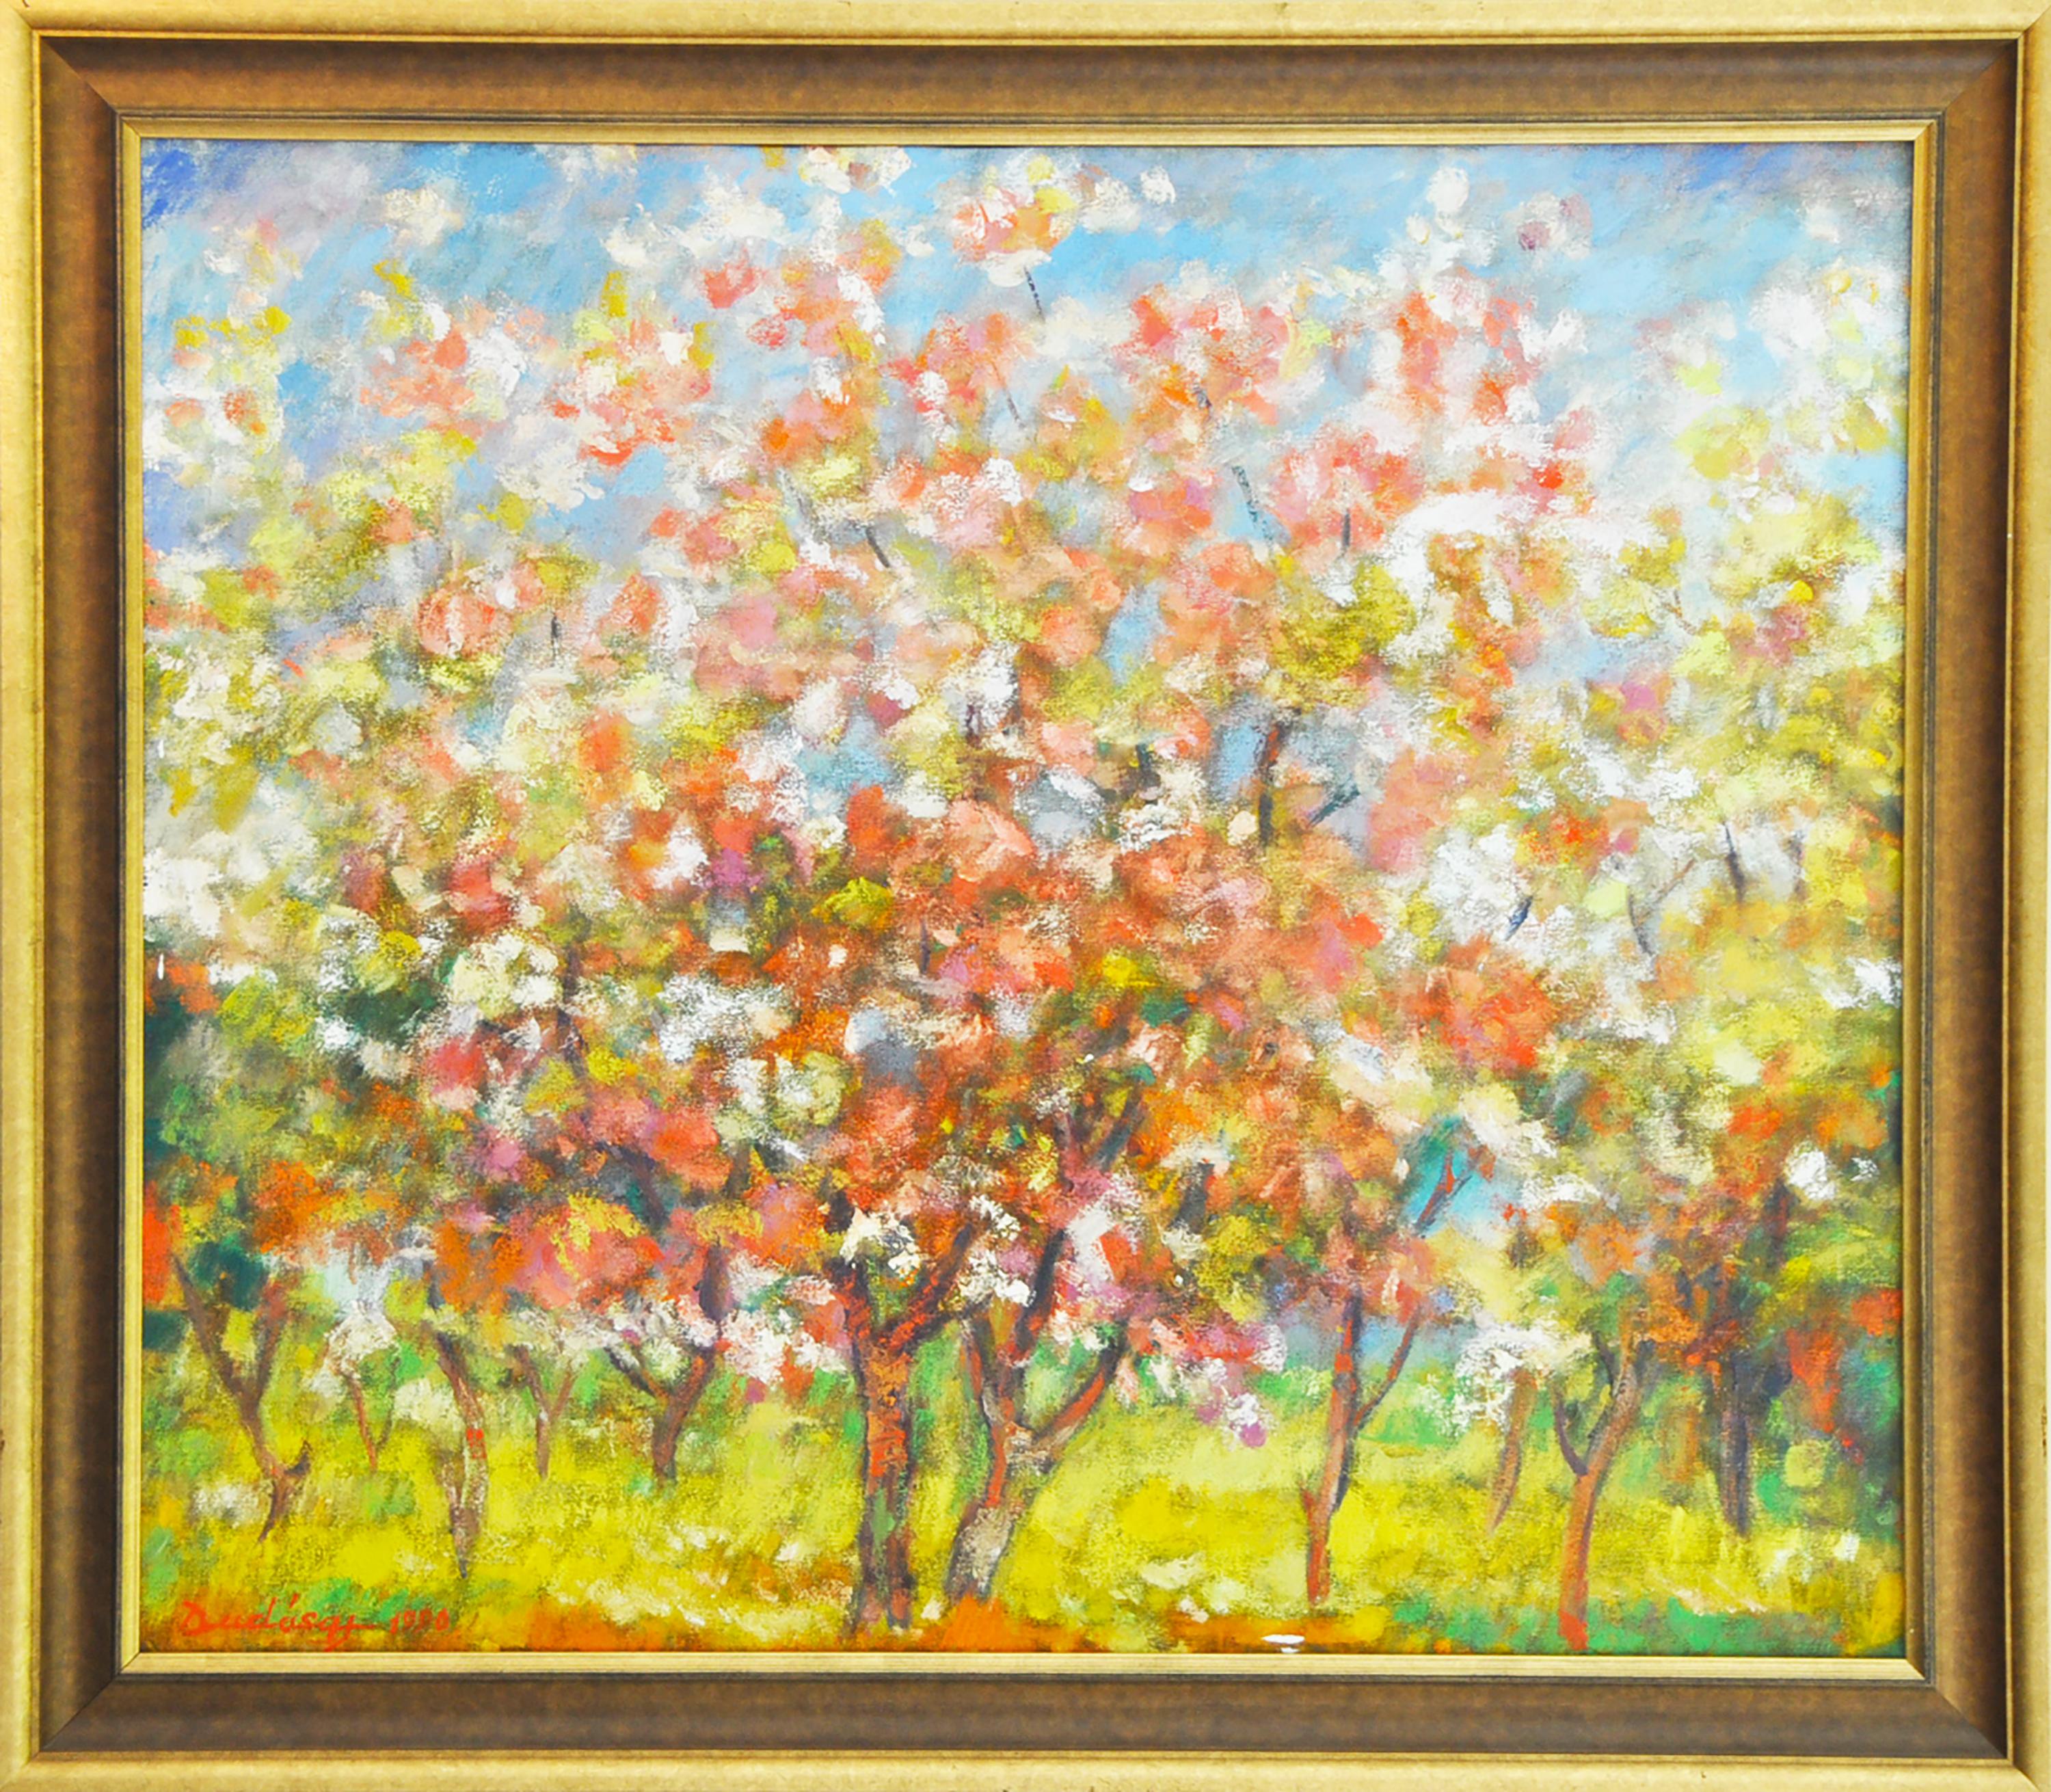 "Orchard in Bloom" by Gyula Dudas, oil on canvas